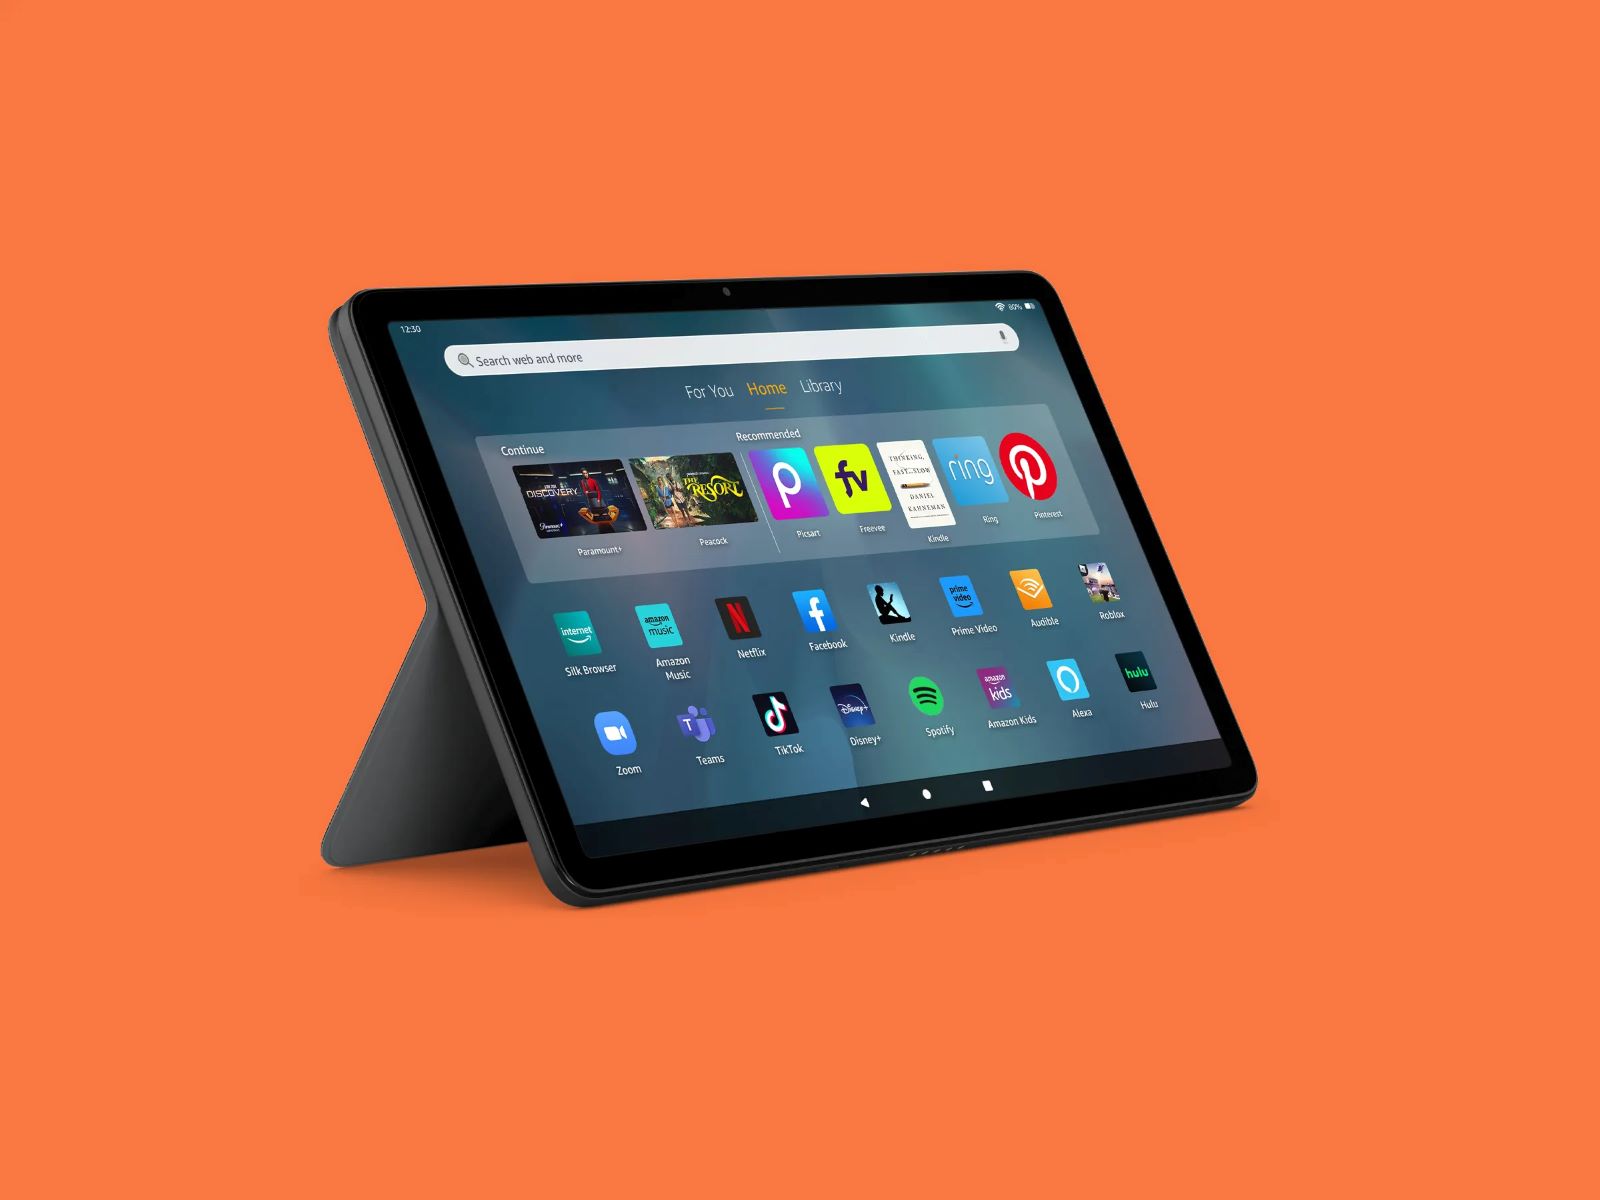 How To Change Wallpaper On Kindle Fire